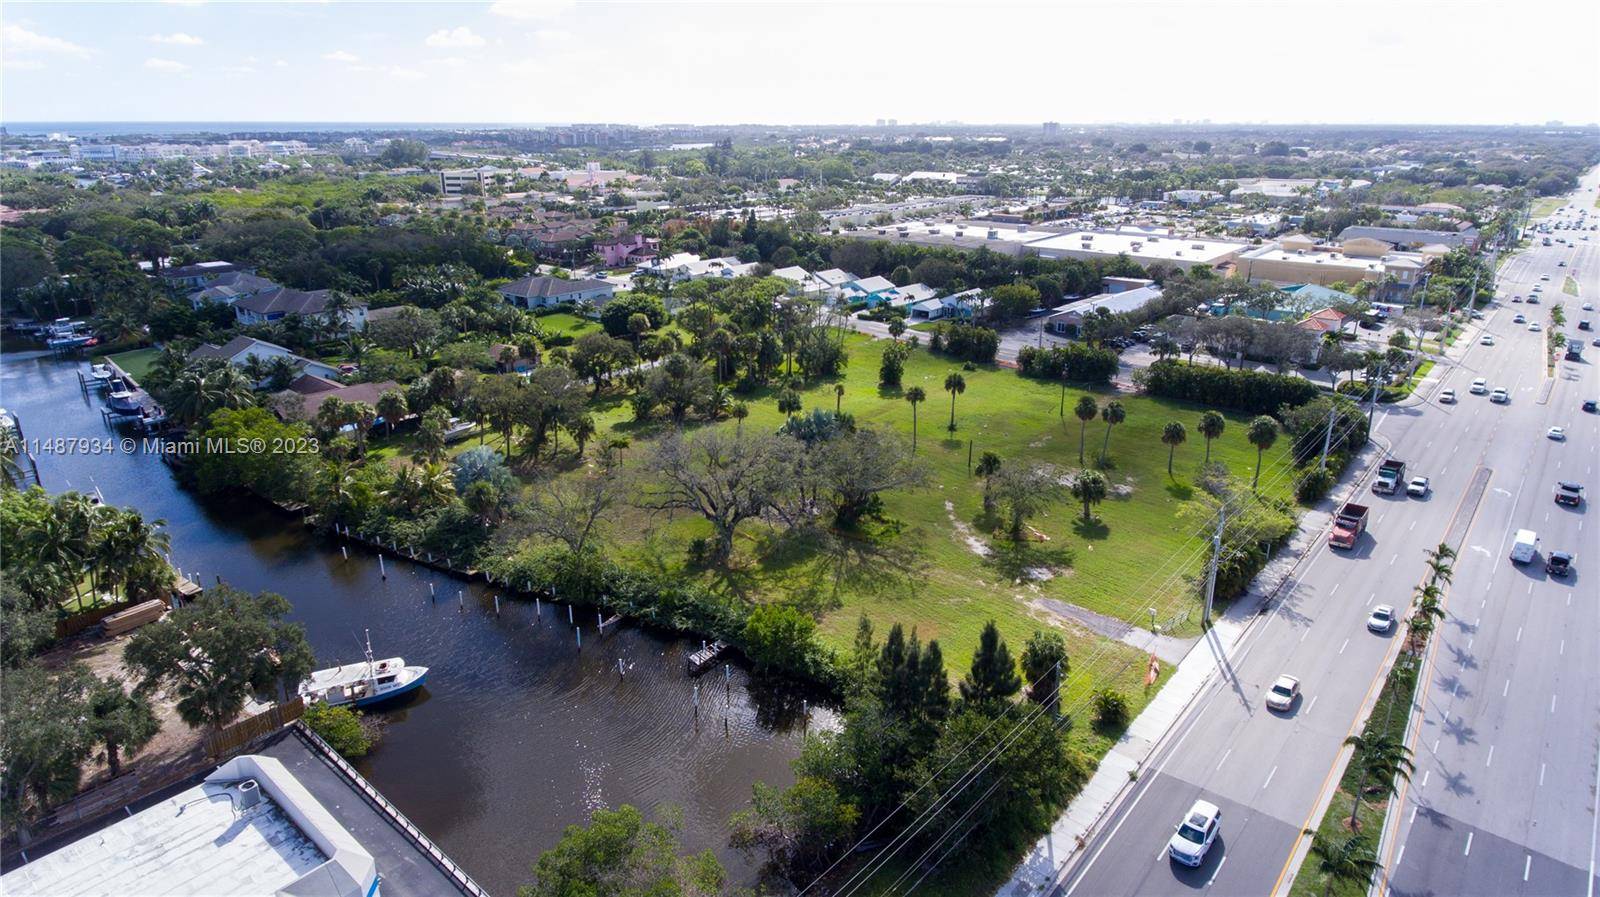 Seize this rare opportunity to own one of the last commercial development lots C2 in the highly desirable Town of Jupiter.